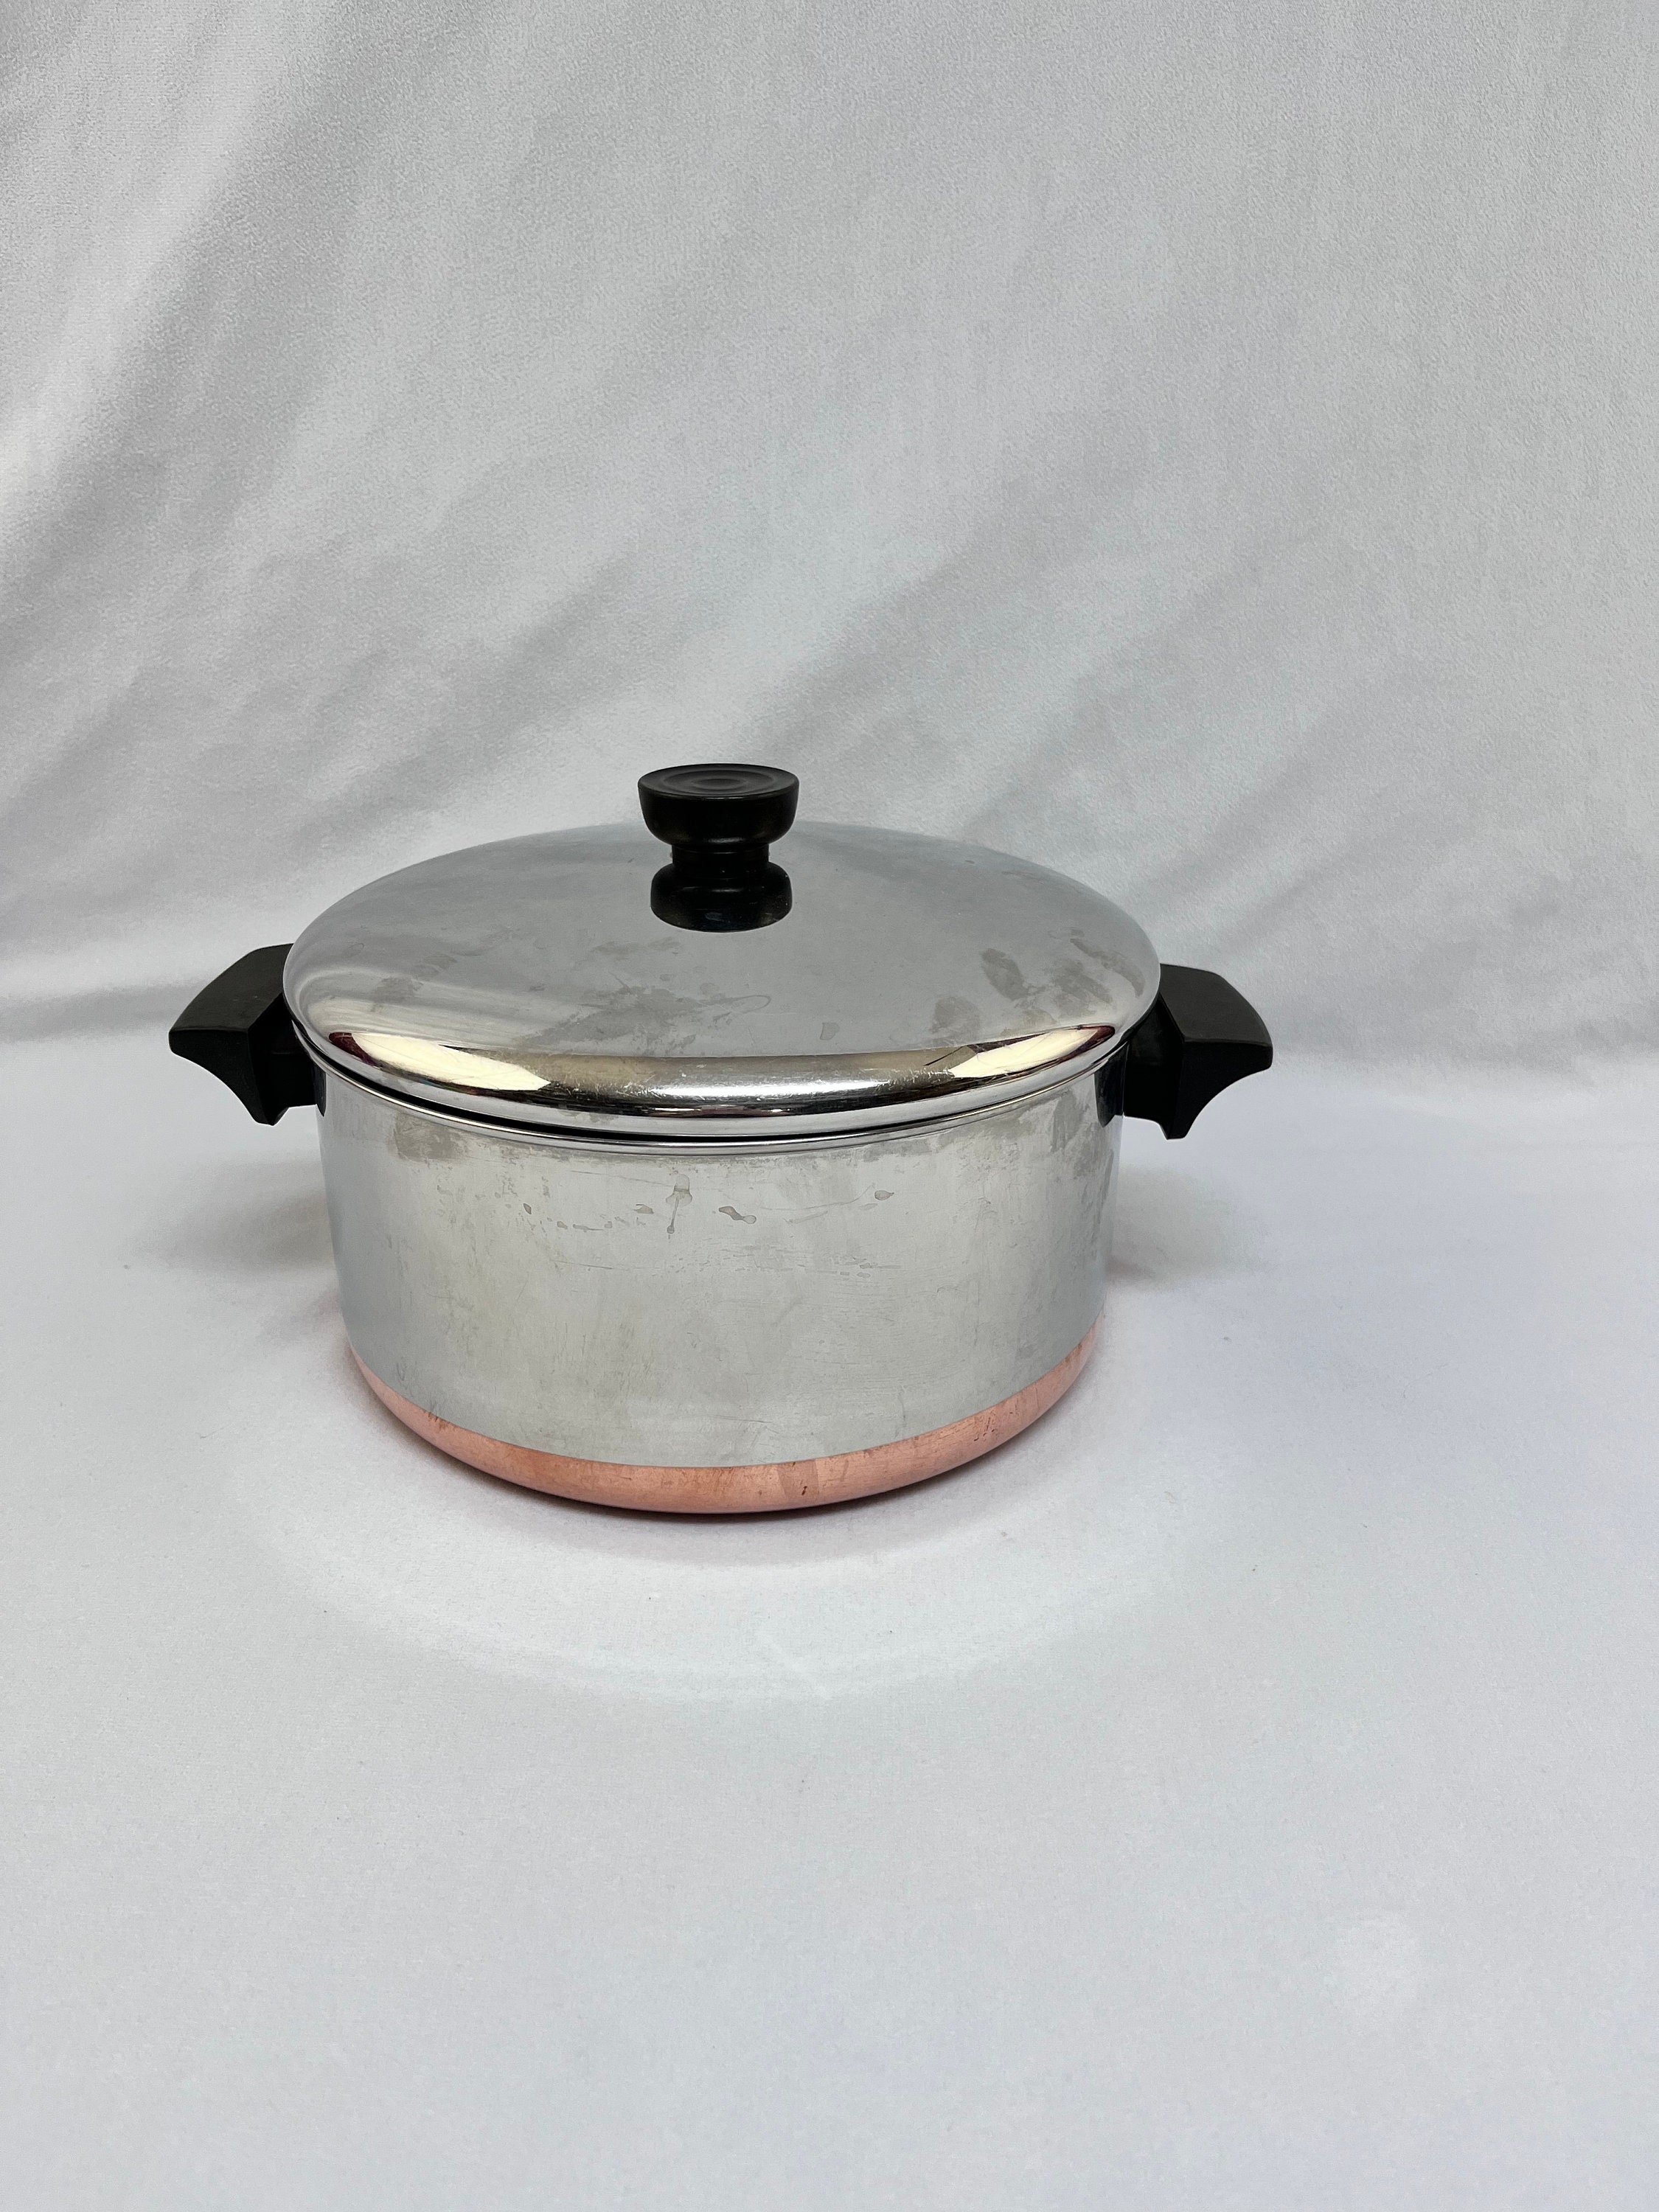 Retro Vintage Revere Ware 10 Copper Skillet With Brass Handle Paul